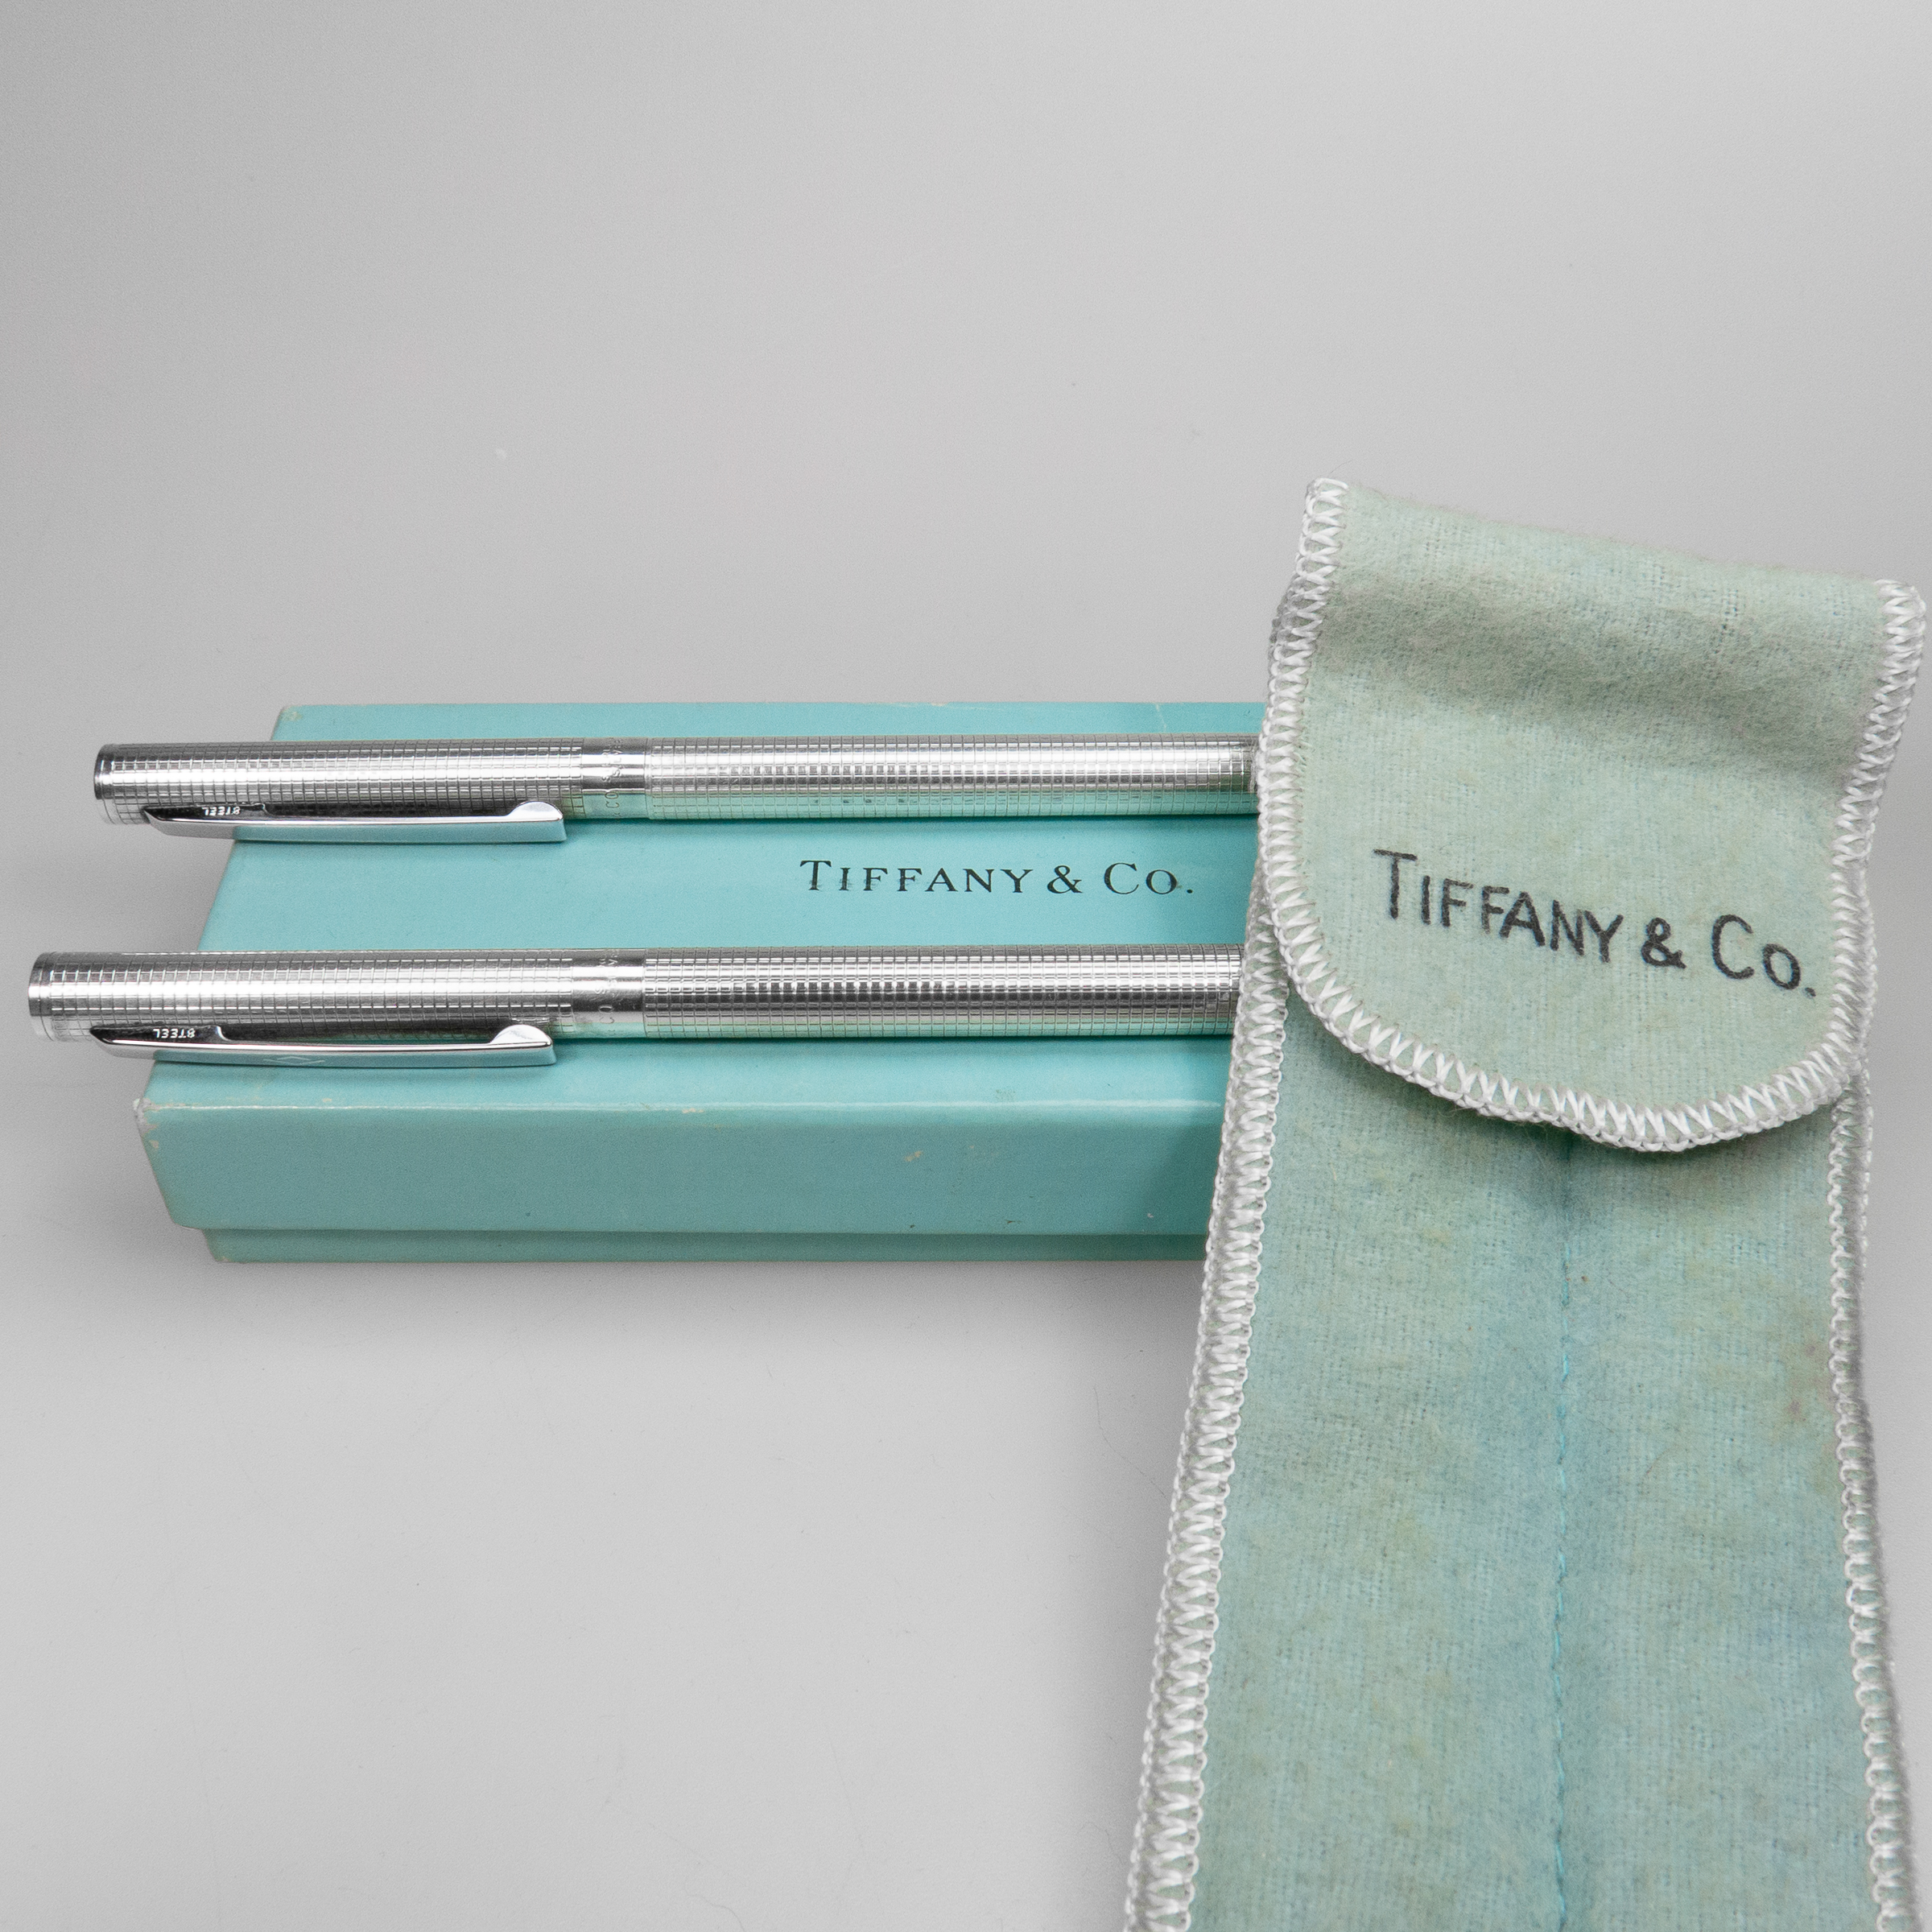 Tiffany & Co. Sterling Silver Pen And Pencil Set